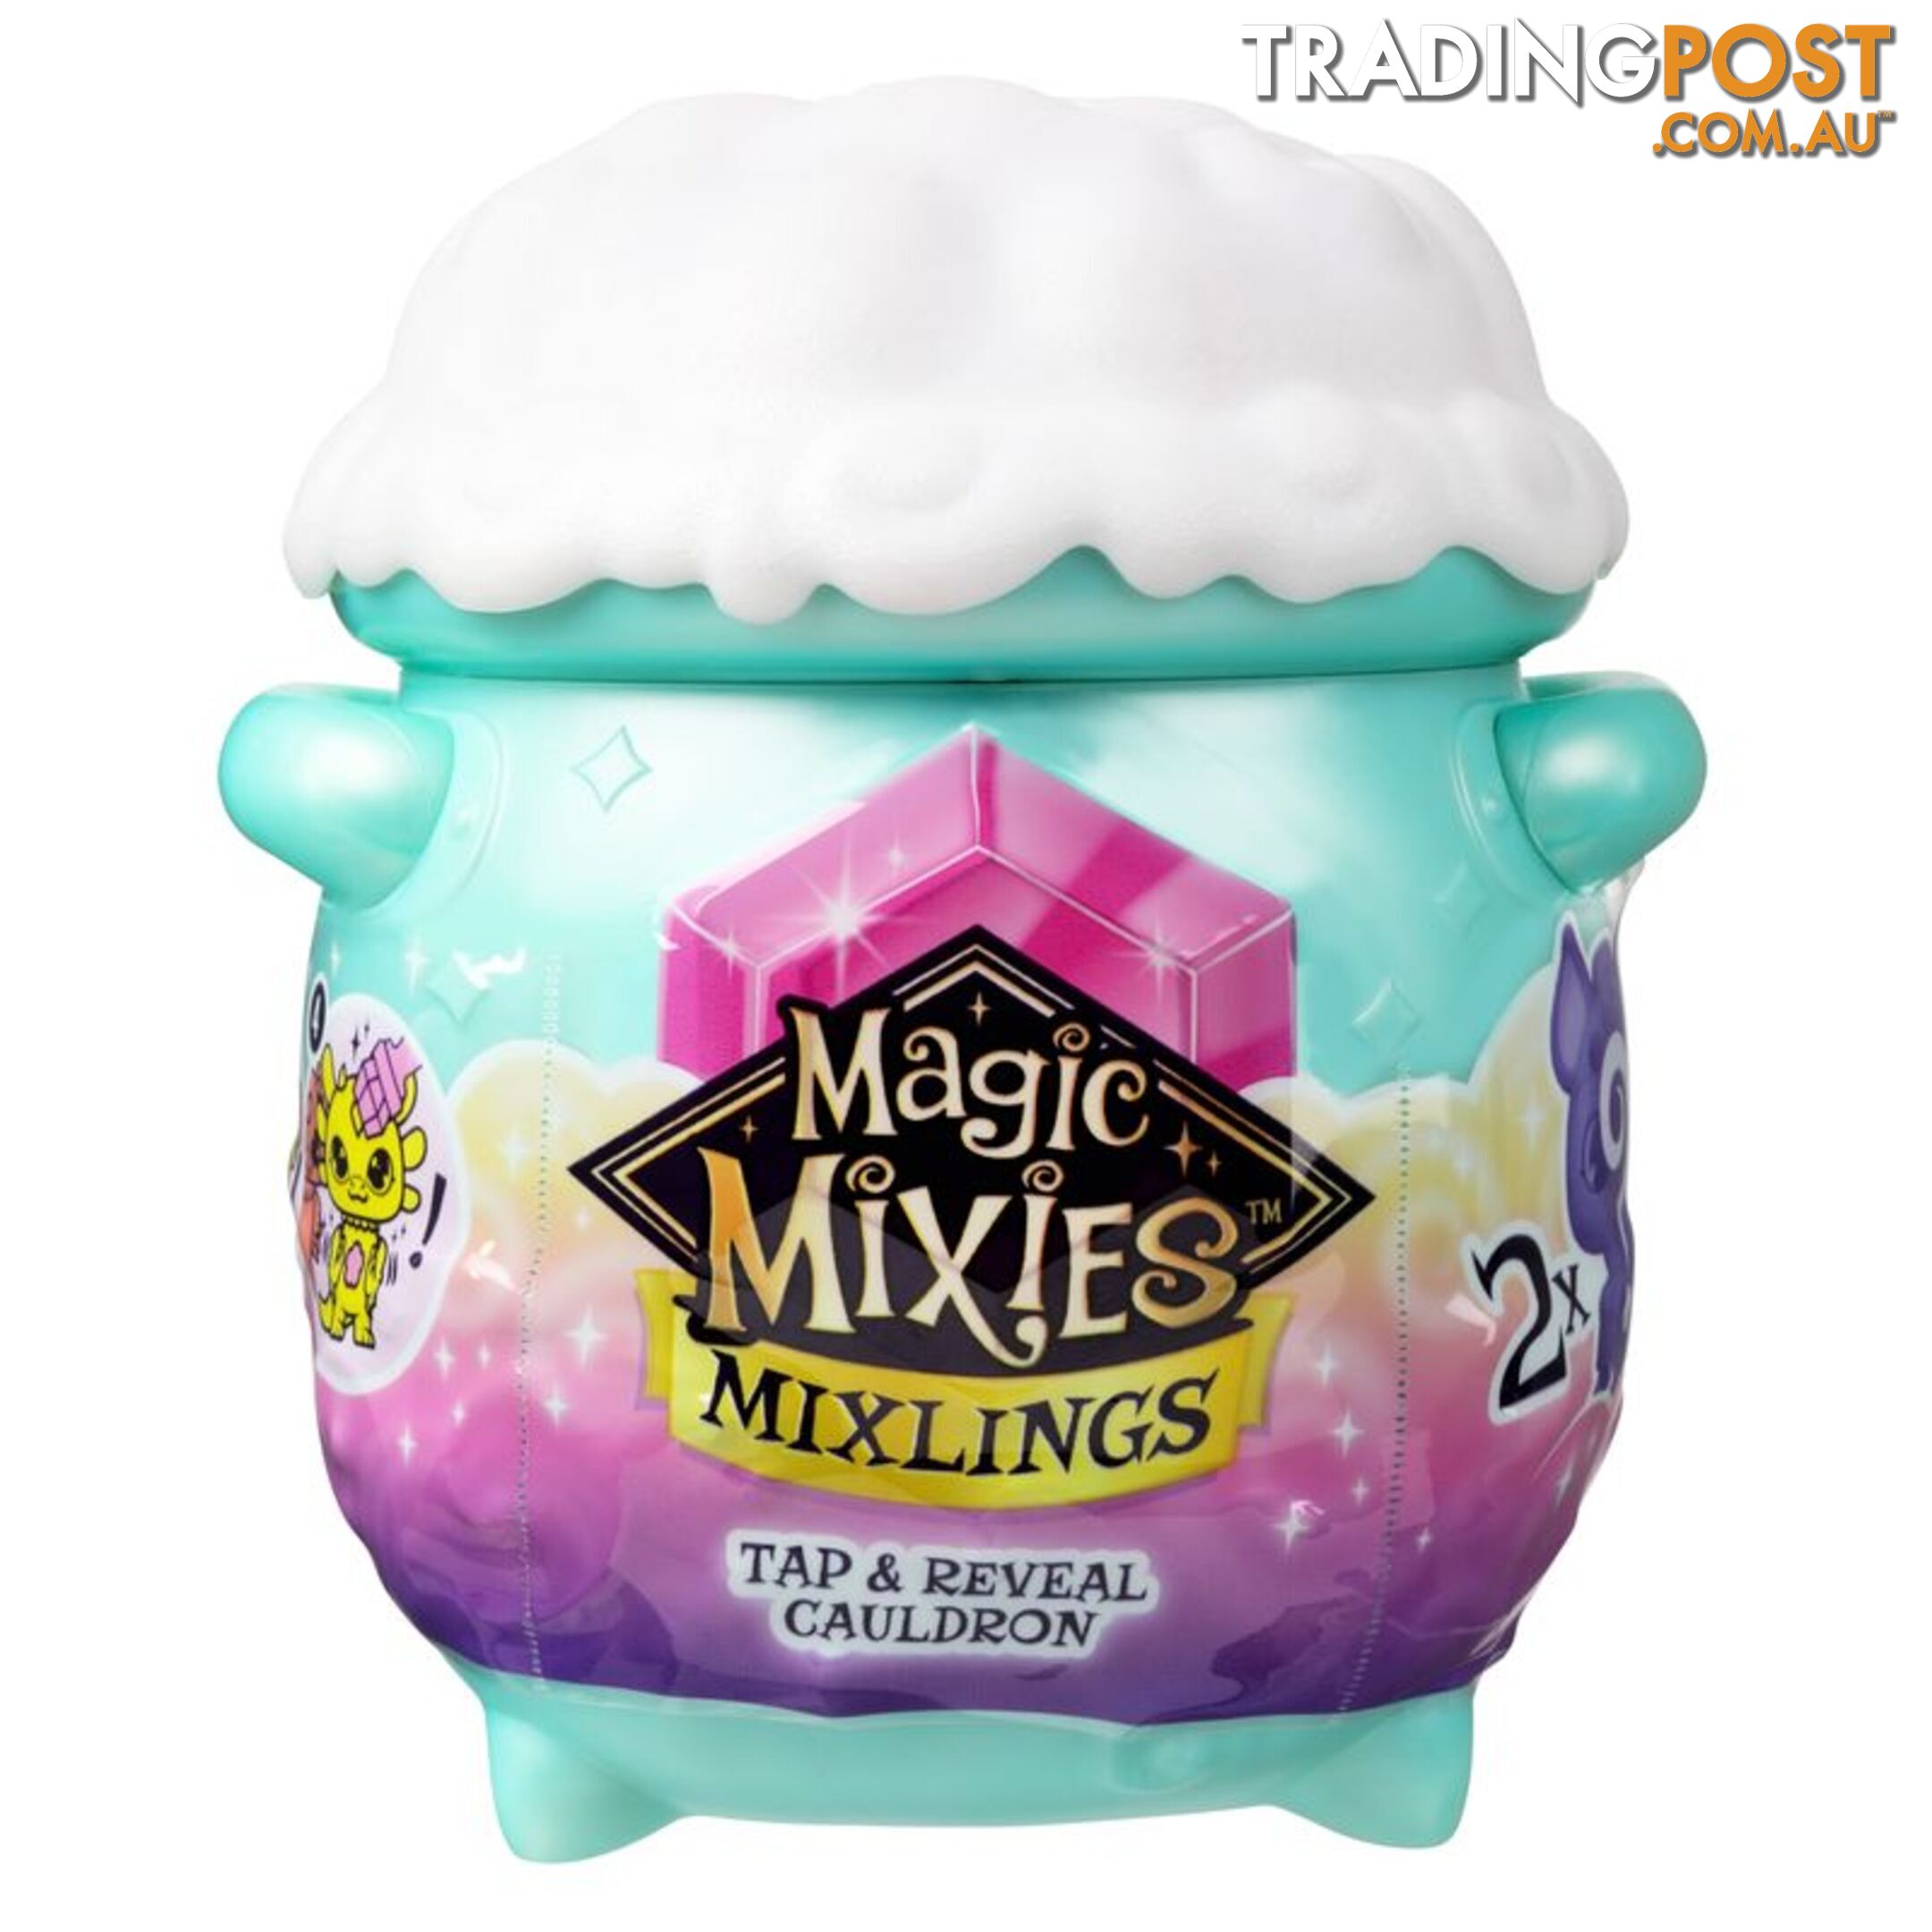 Magic Mixies - Mixlings S2 Tap & Reveal Cauldron Assorted Styles - Mj14695 - 630996146965